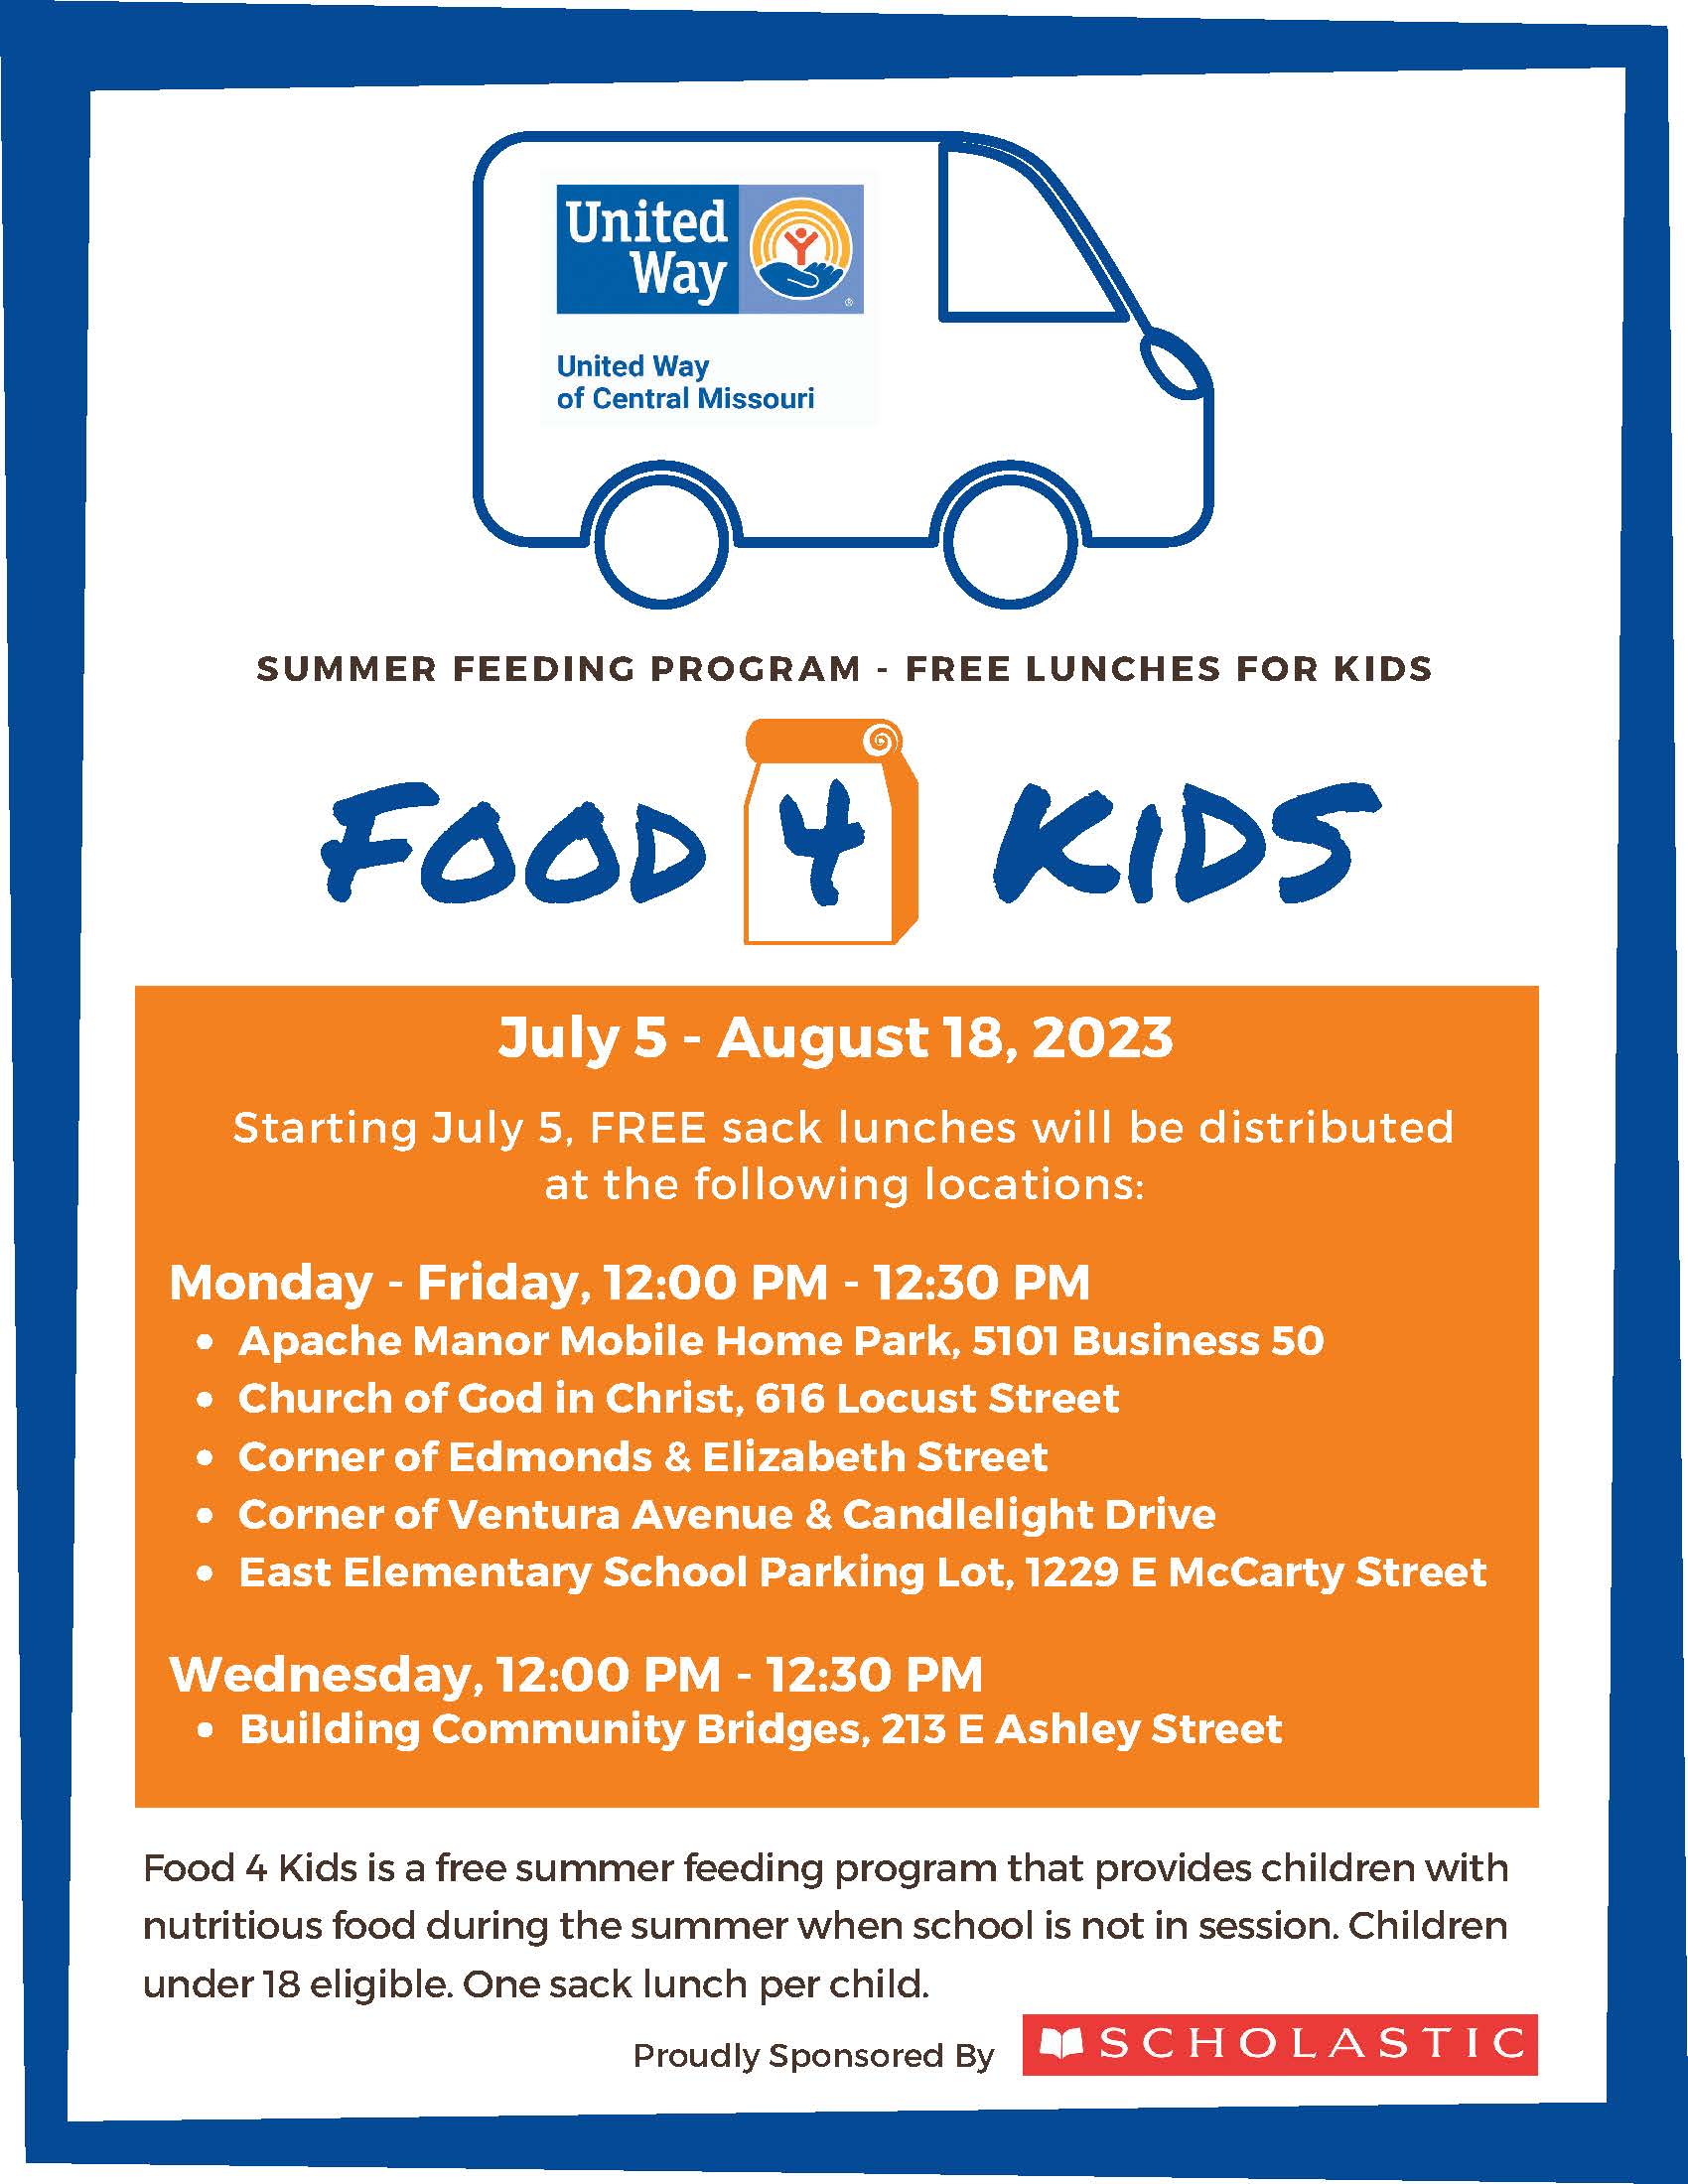 Food 4 Kids Summer Feeding Program provides free sack lunches to children under 18. Call the United Way office at 573-636-4100 for more information.